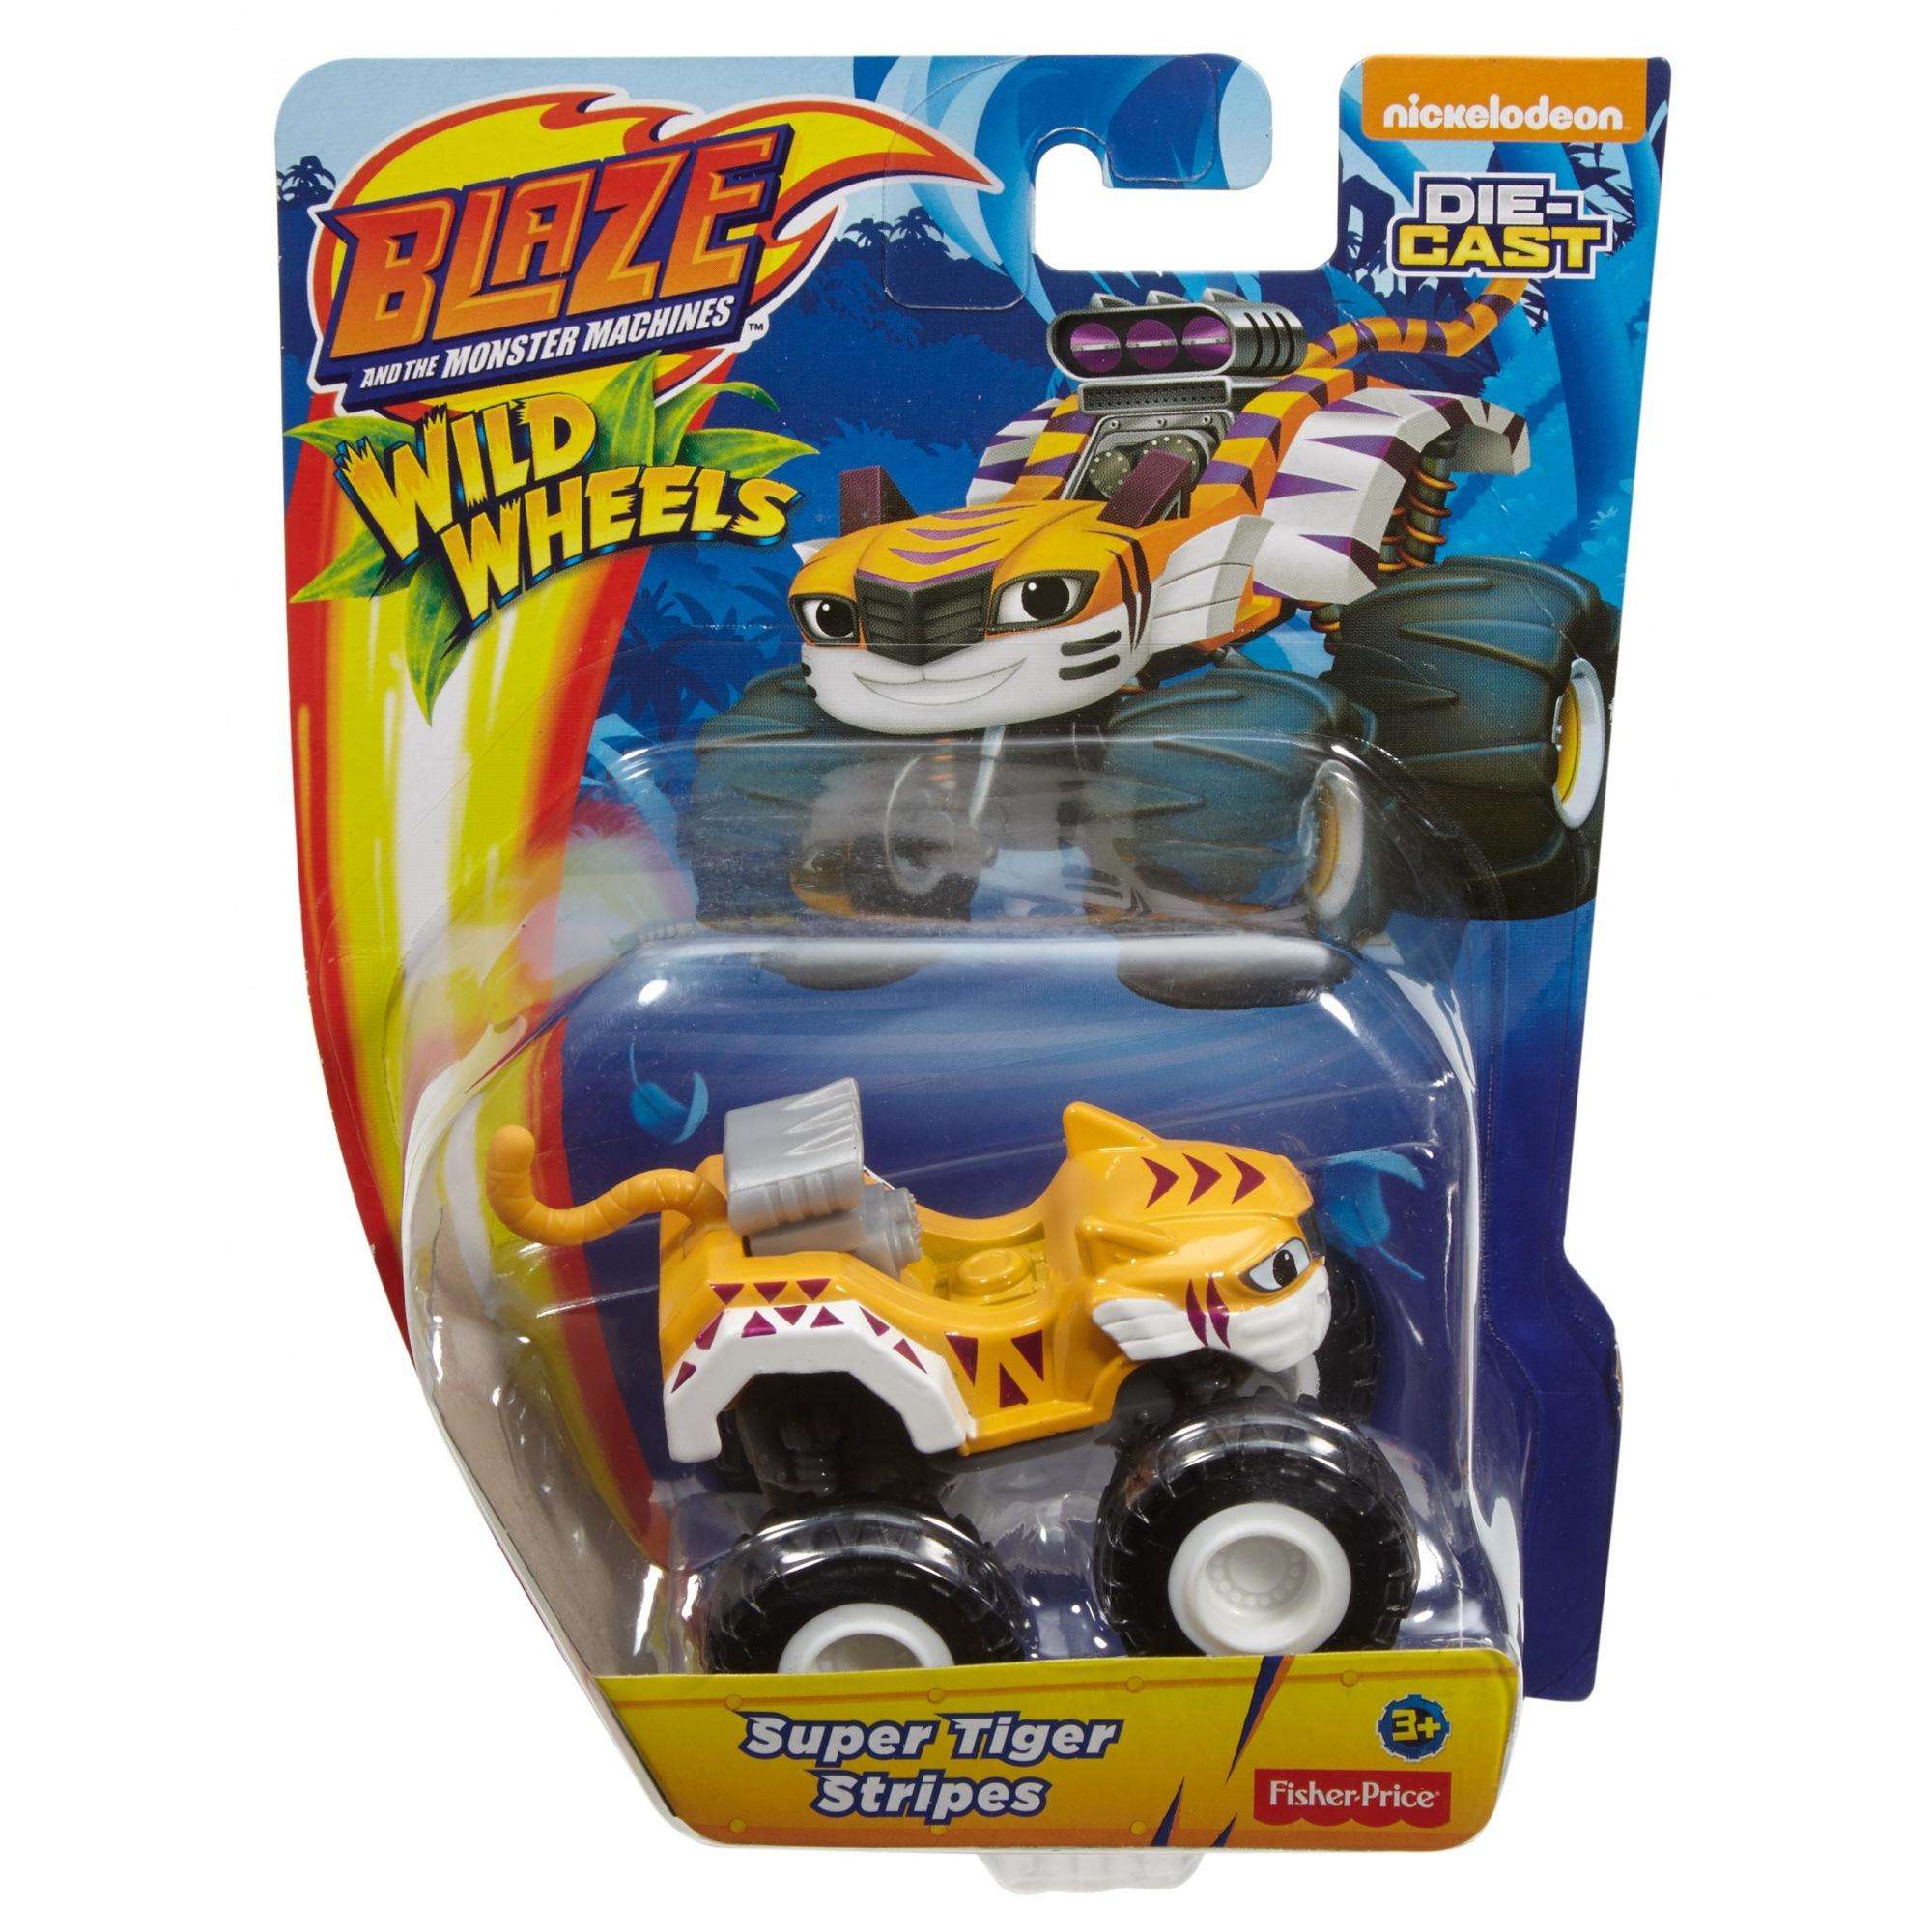 Fisher-Price Blaze & the Monster Machines Diecast Monster Truck Collection, Styles May Vary - image 6 of 6